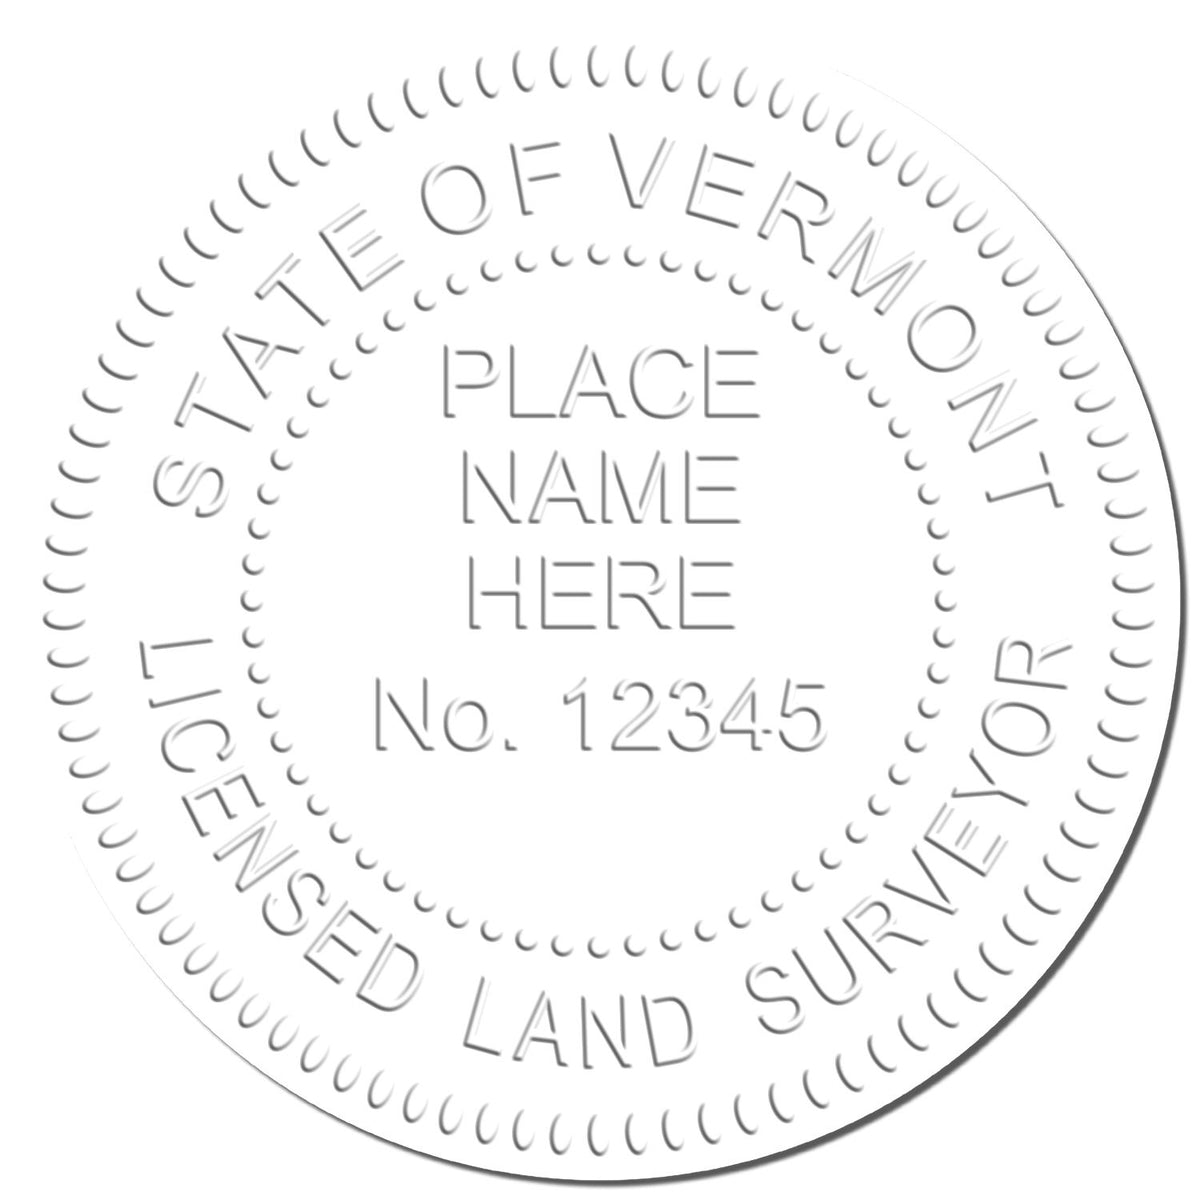 This paper is stamped with a sample imprint of the Gift Vermont Land Surveyor Seal, signifying its quality and reliability.